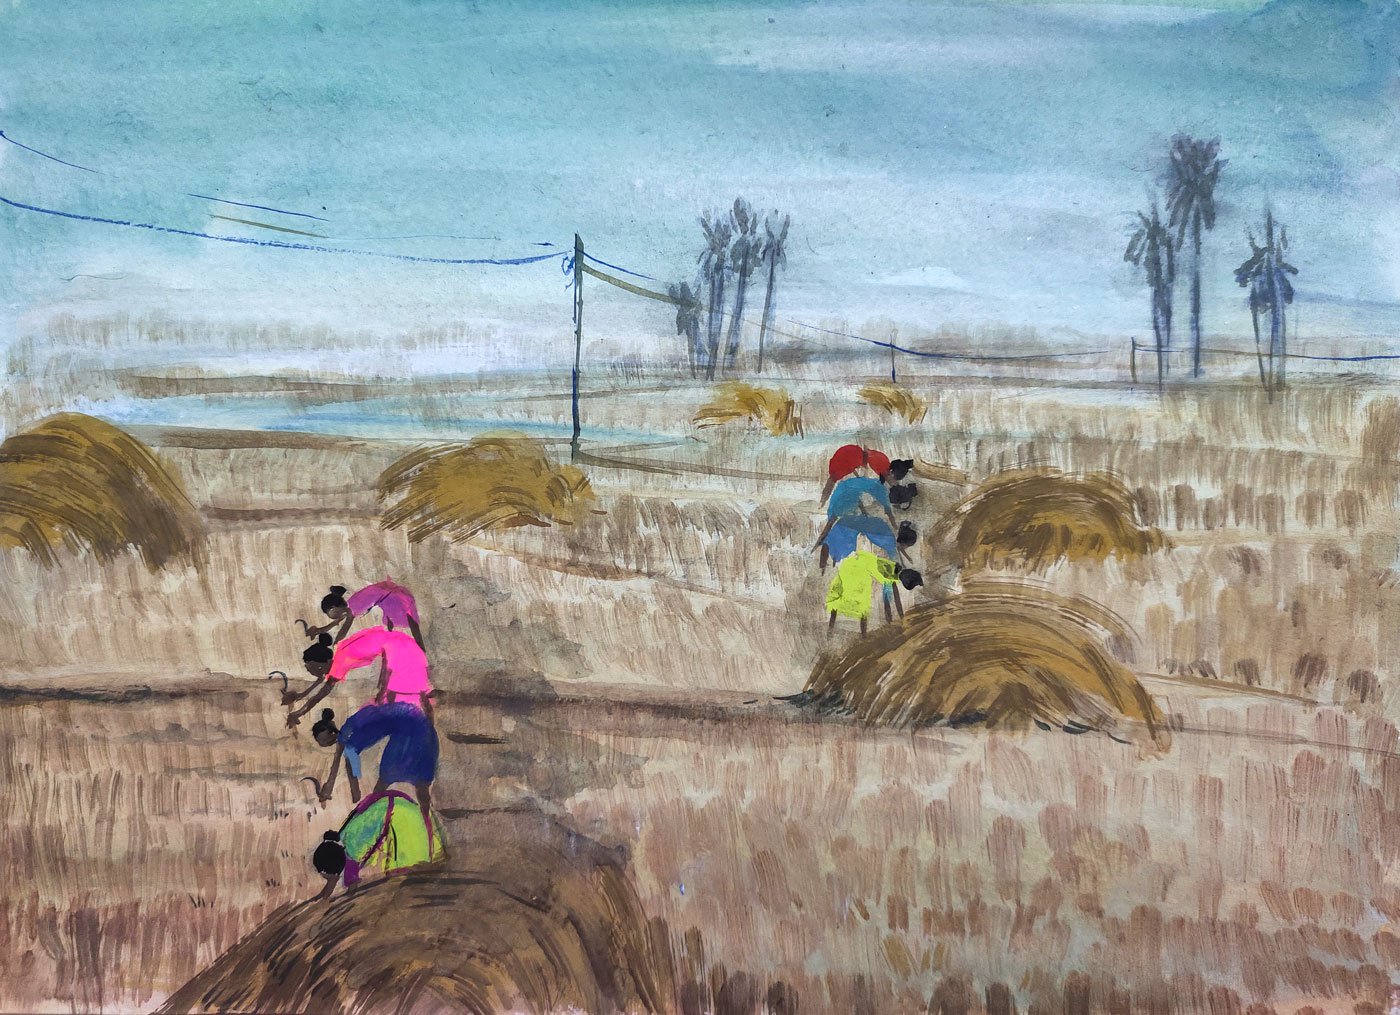 Women at work in the fields. Most of the families in these villages own agricultural land where they primarily cultivate paddy. It was harvest time when the artist visited Deocha